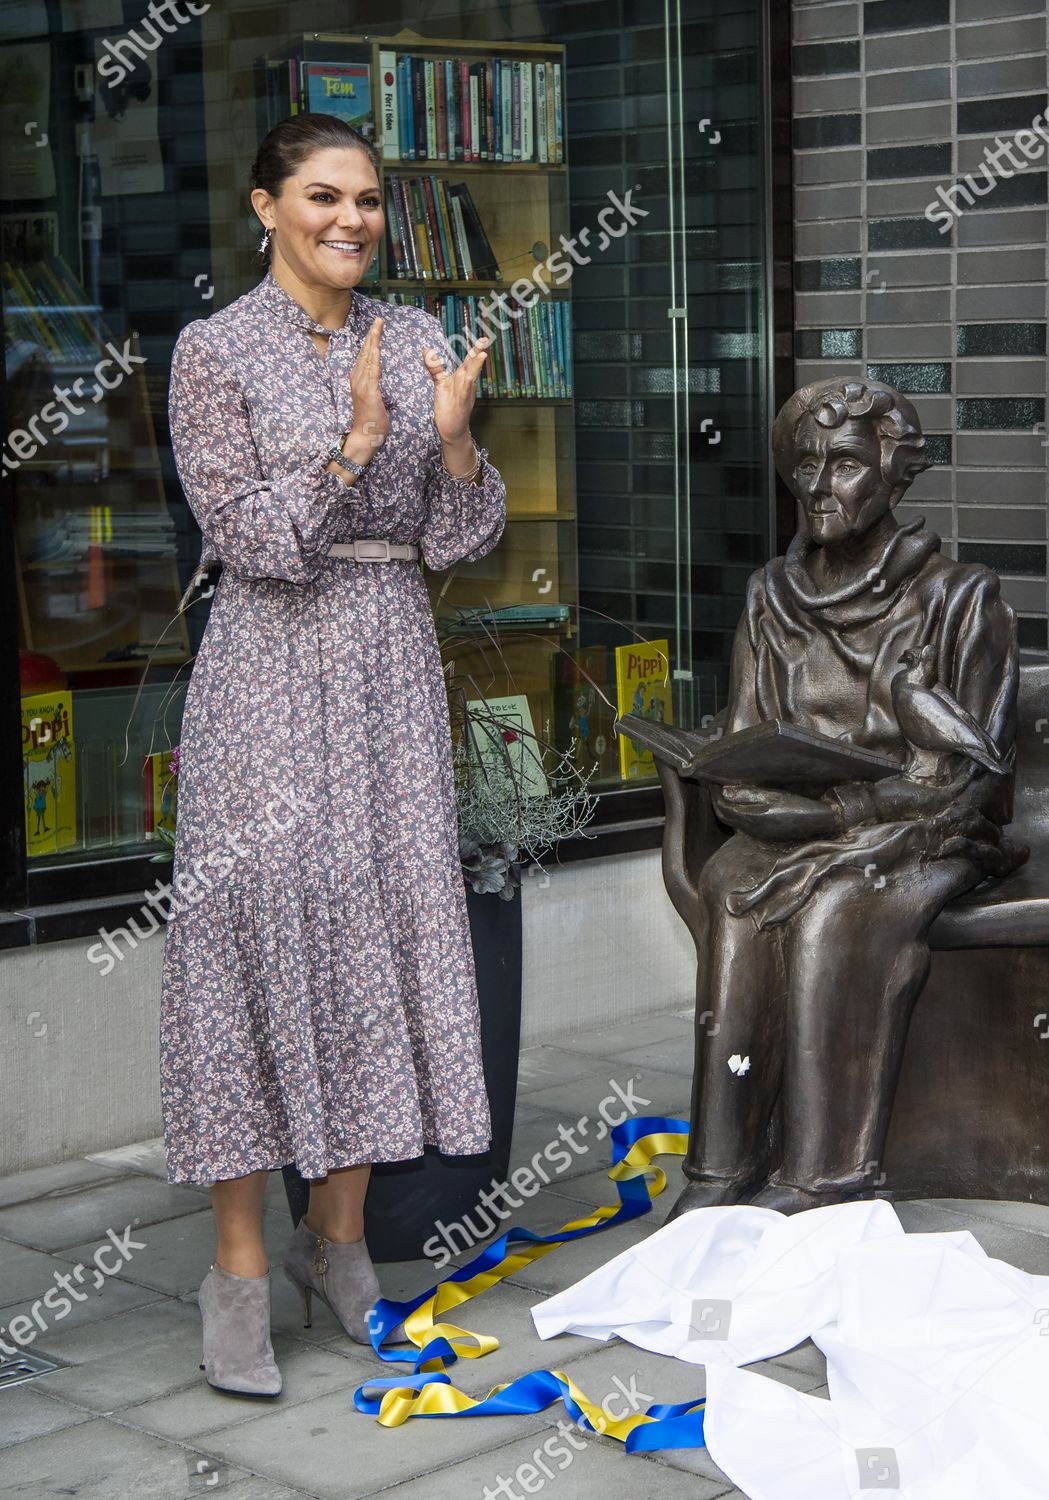 crown-princess-victoria-attends-inauguration-of-a-sculpture-depicting-childrens-book-author-astrid-lindgren-astrid-lindgren-childrens-hospital-solna-outside-stockholm-sweden-shutterstock-editorial-10945887l.jpg